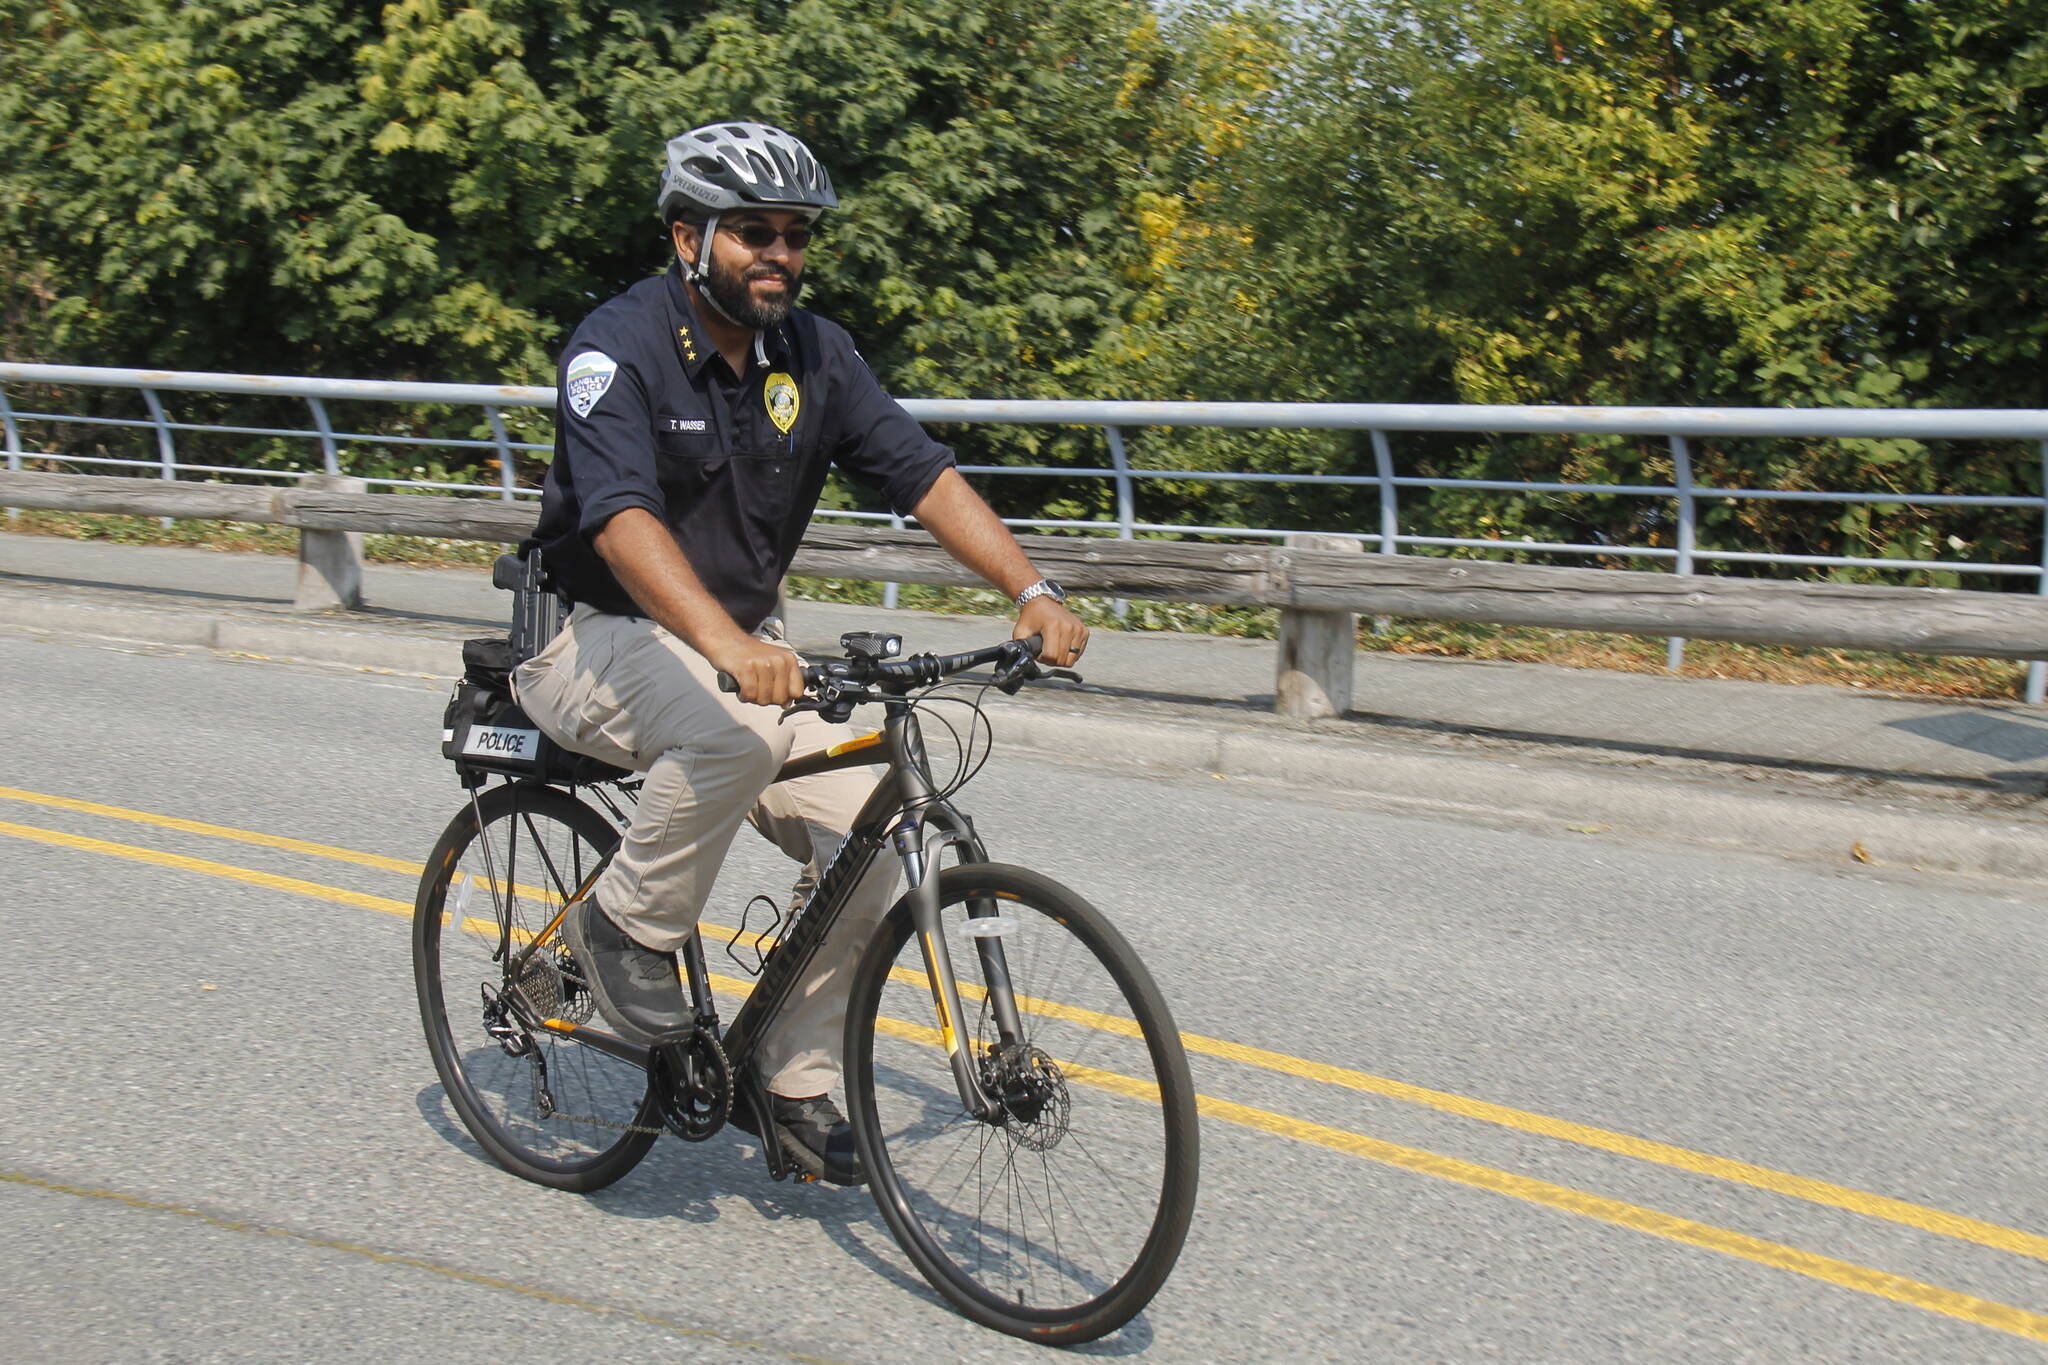 Photo by Kira Erickson/South Whidbey Record
Langley Police Chief Tavier Wasser cycles down First Street in the Village by the Sea.